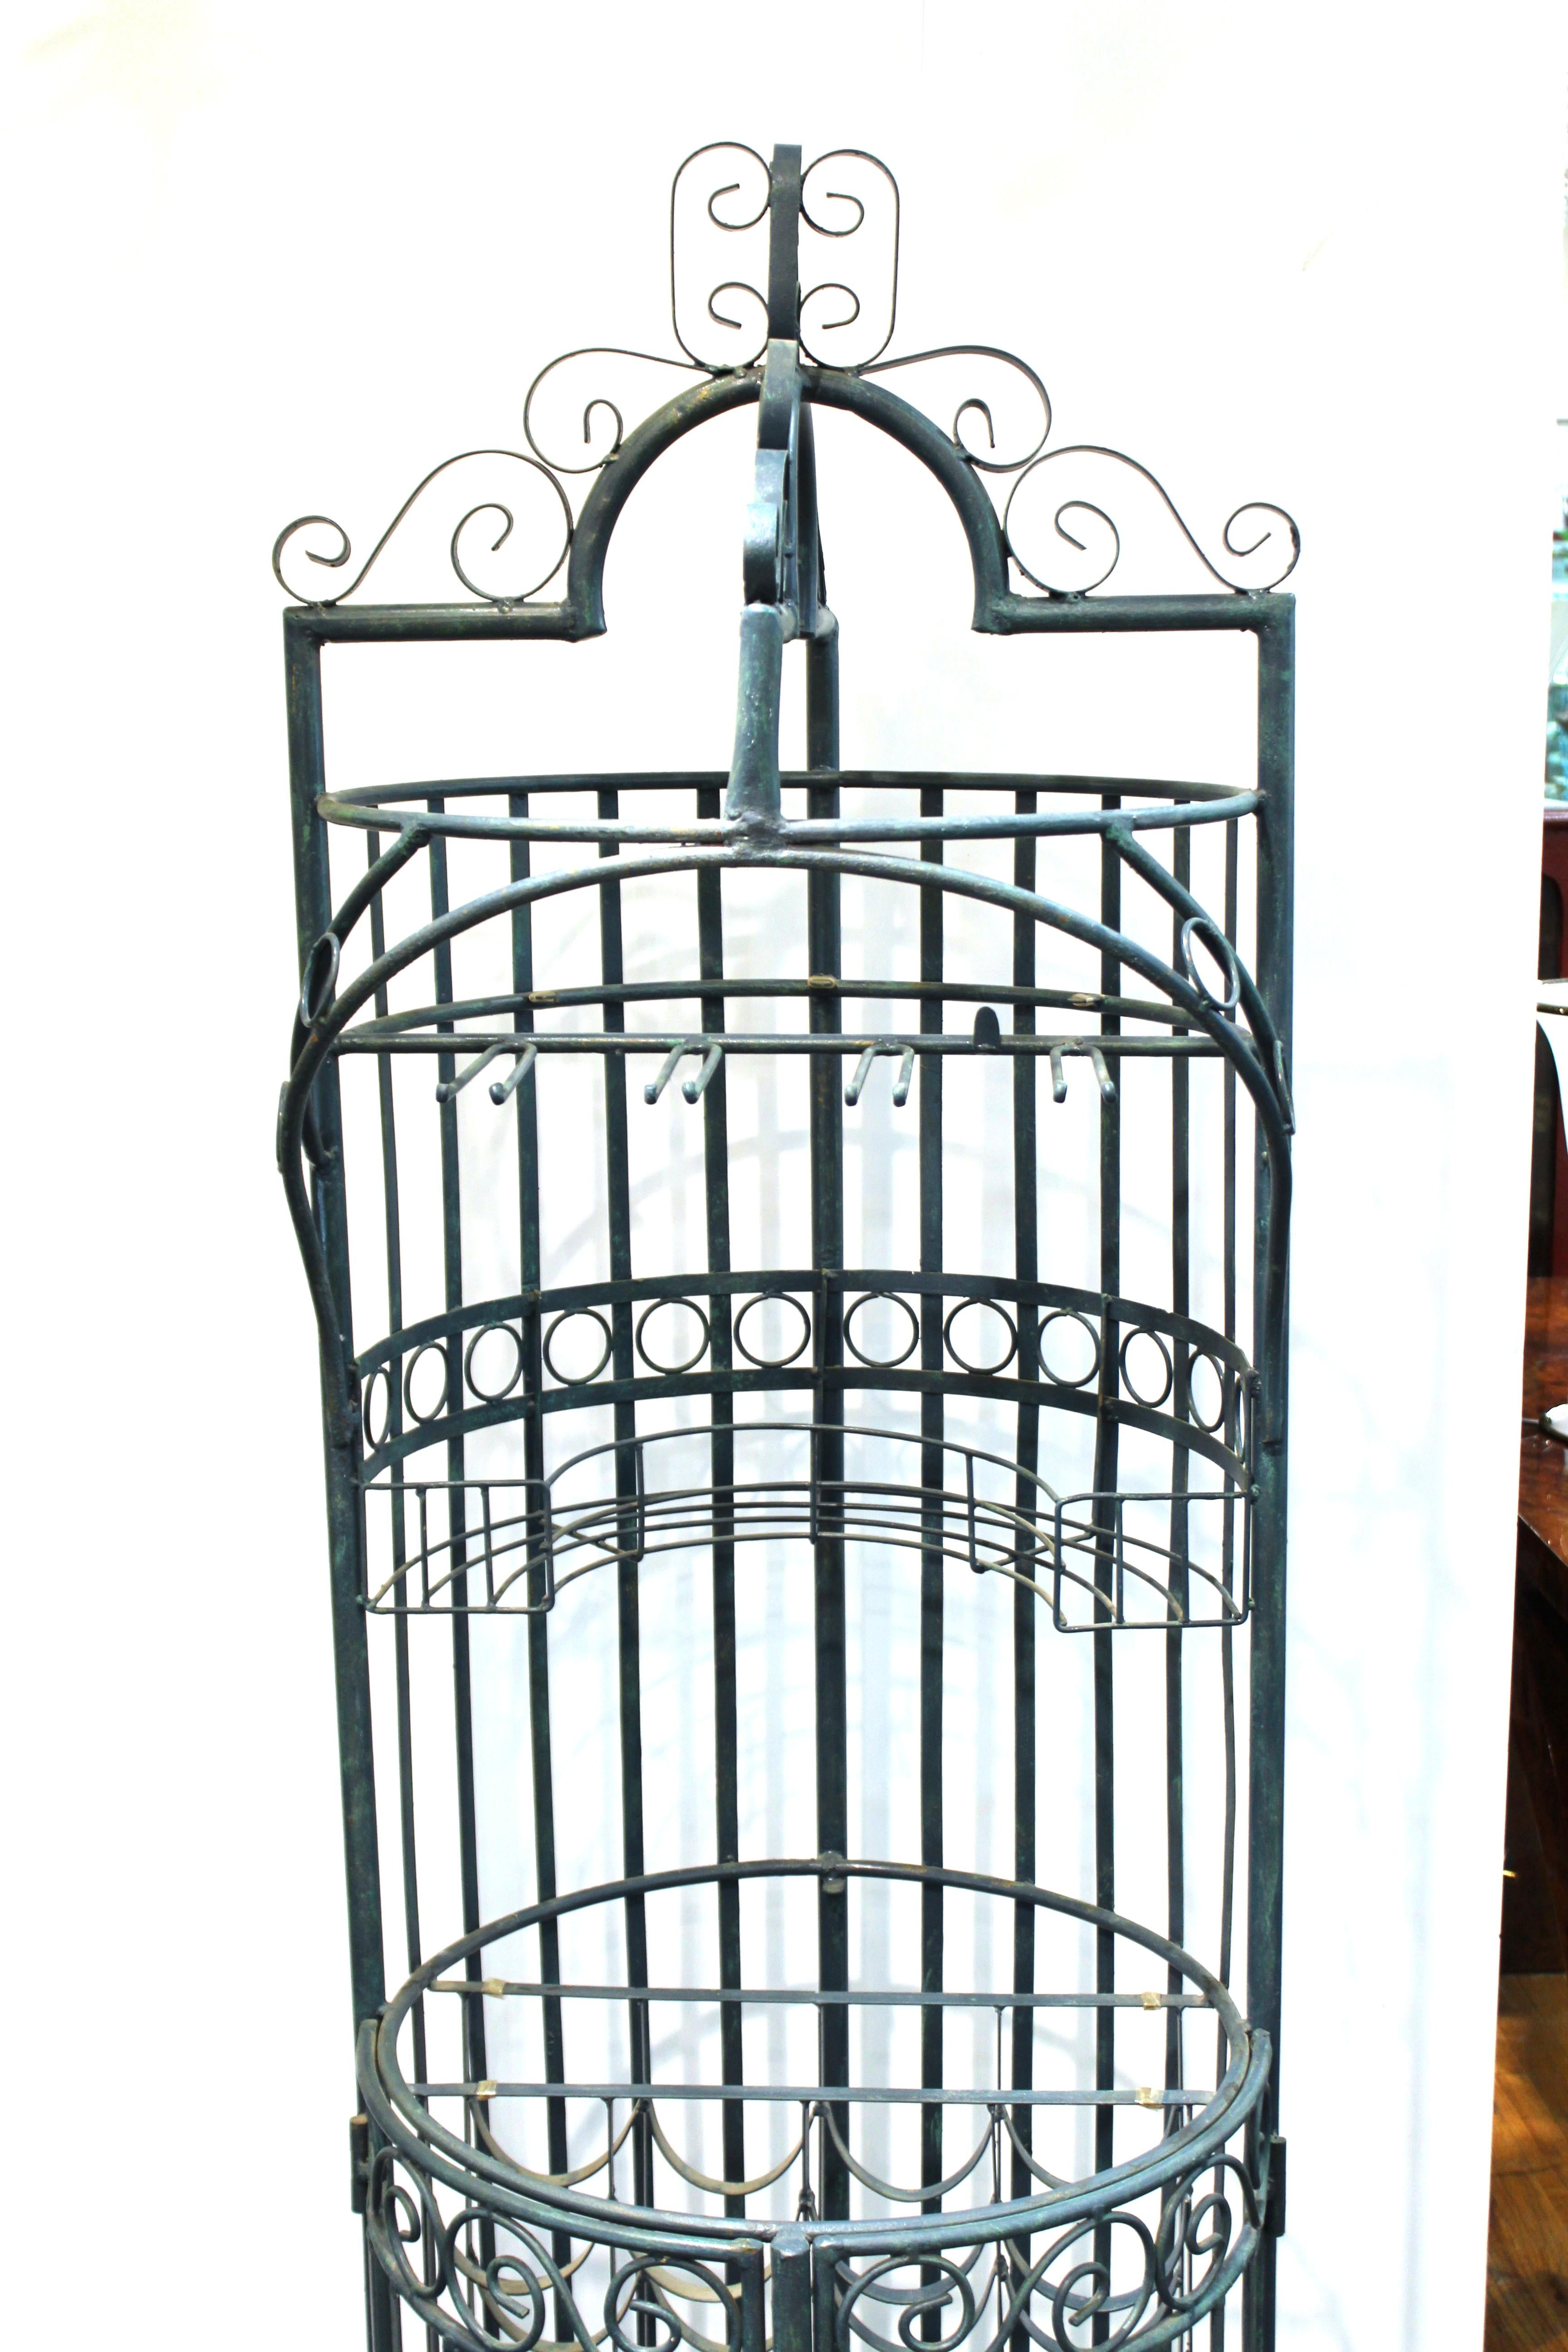 Mid-Century Modern wine bar or wine cage made of wrought iron. The piece has hinged doors on the lower part for accessing the wine storage shelves. The piece is in great vintage condition with age-appropriate wear to the metal. Missing the original